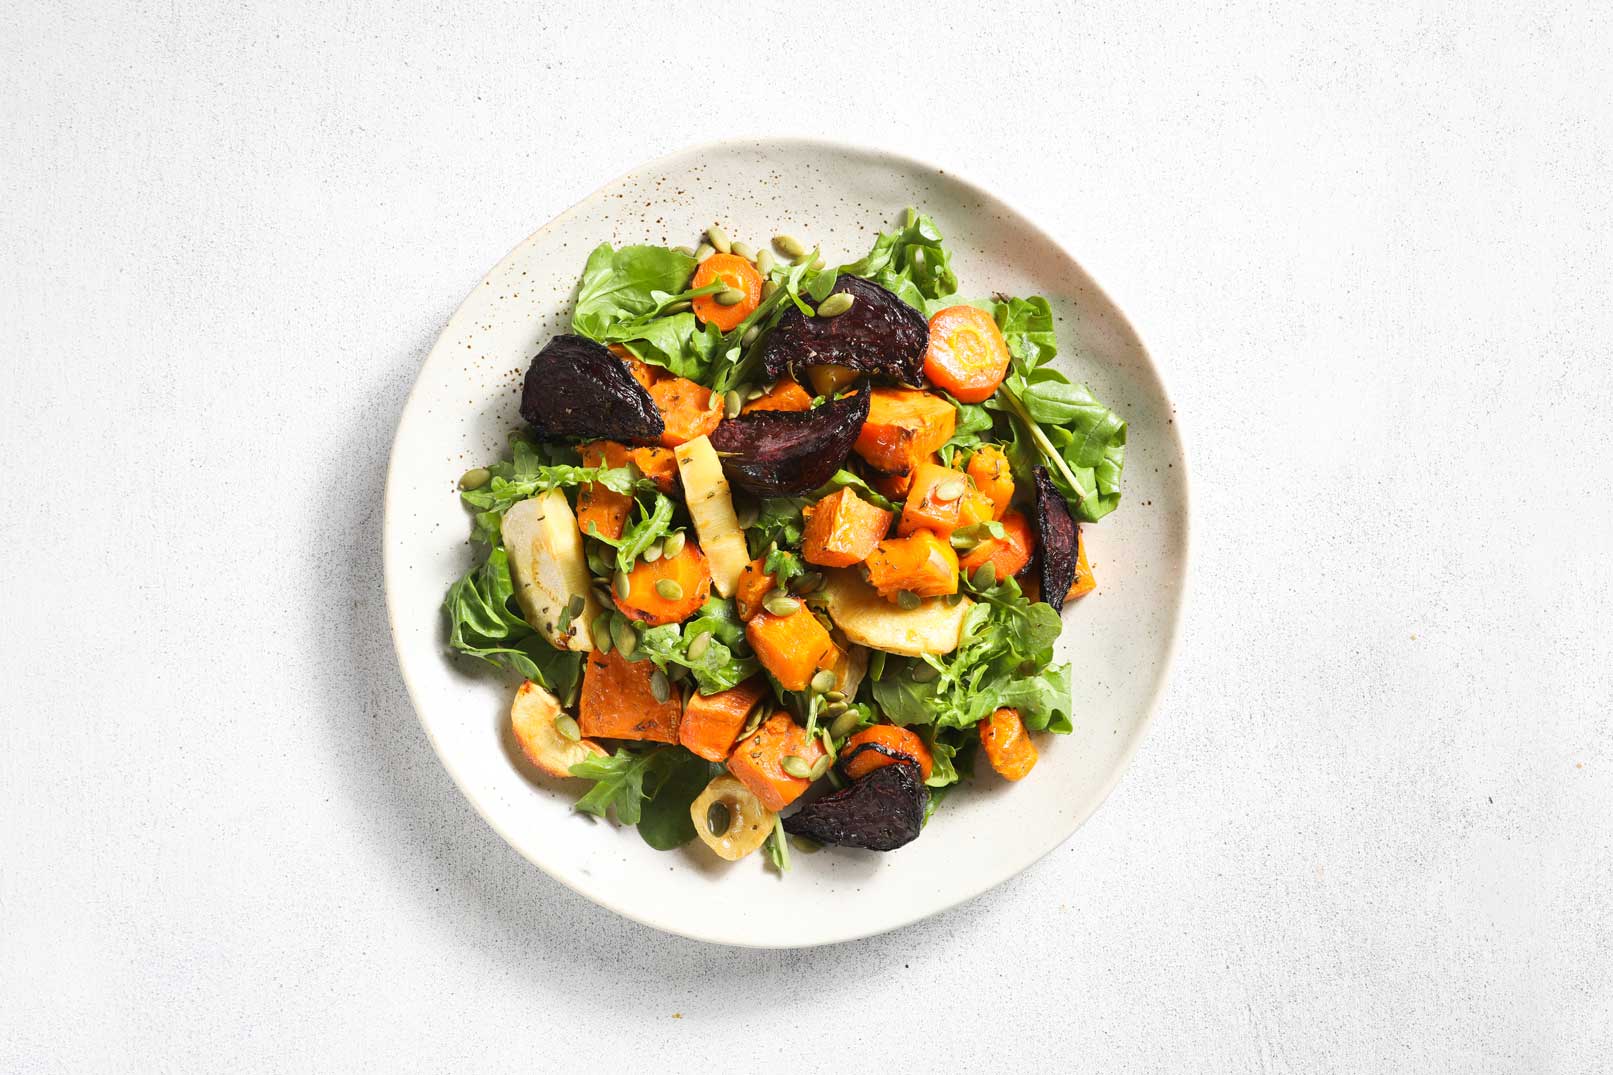 Image of a roasted vegetable salad on a white plate shot from